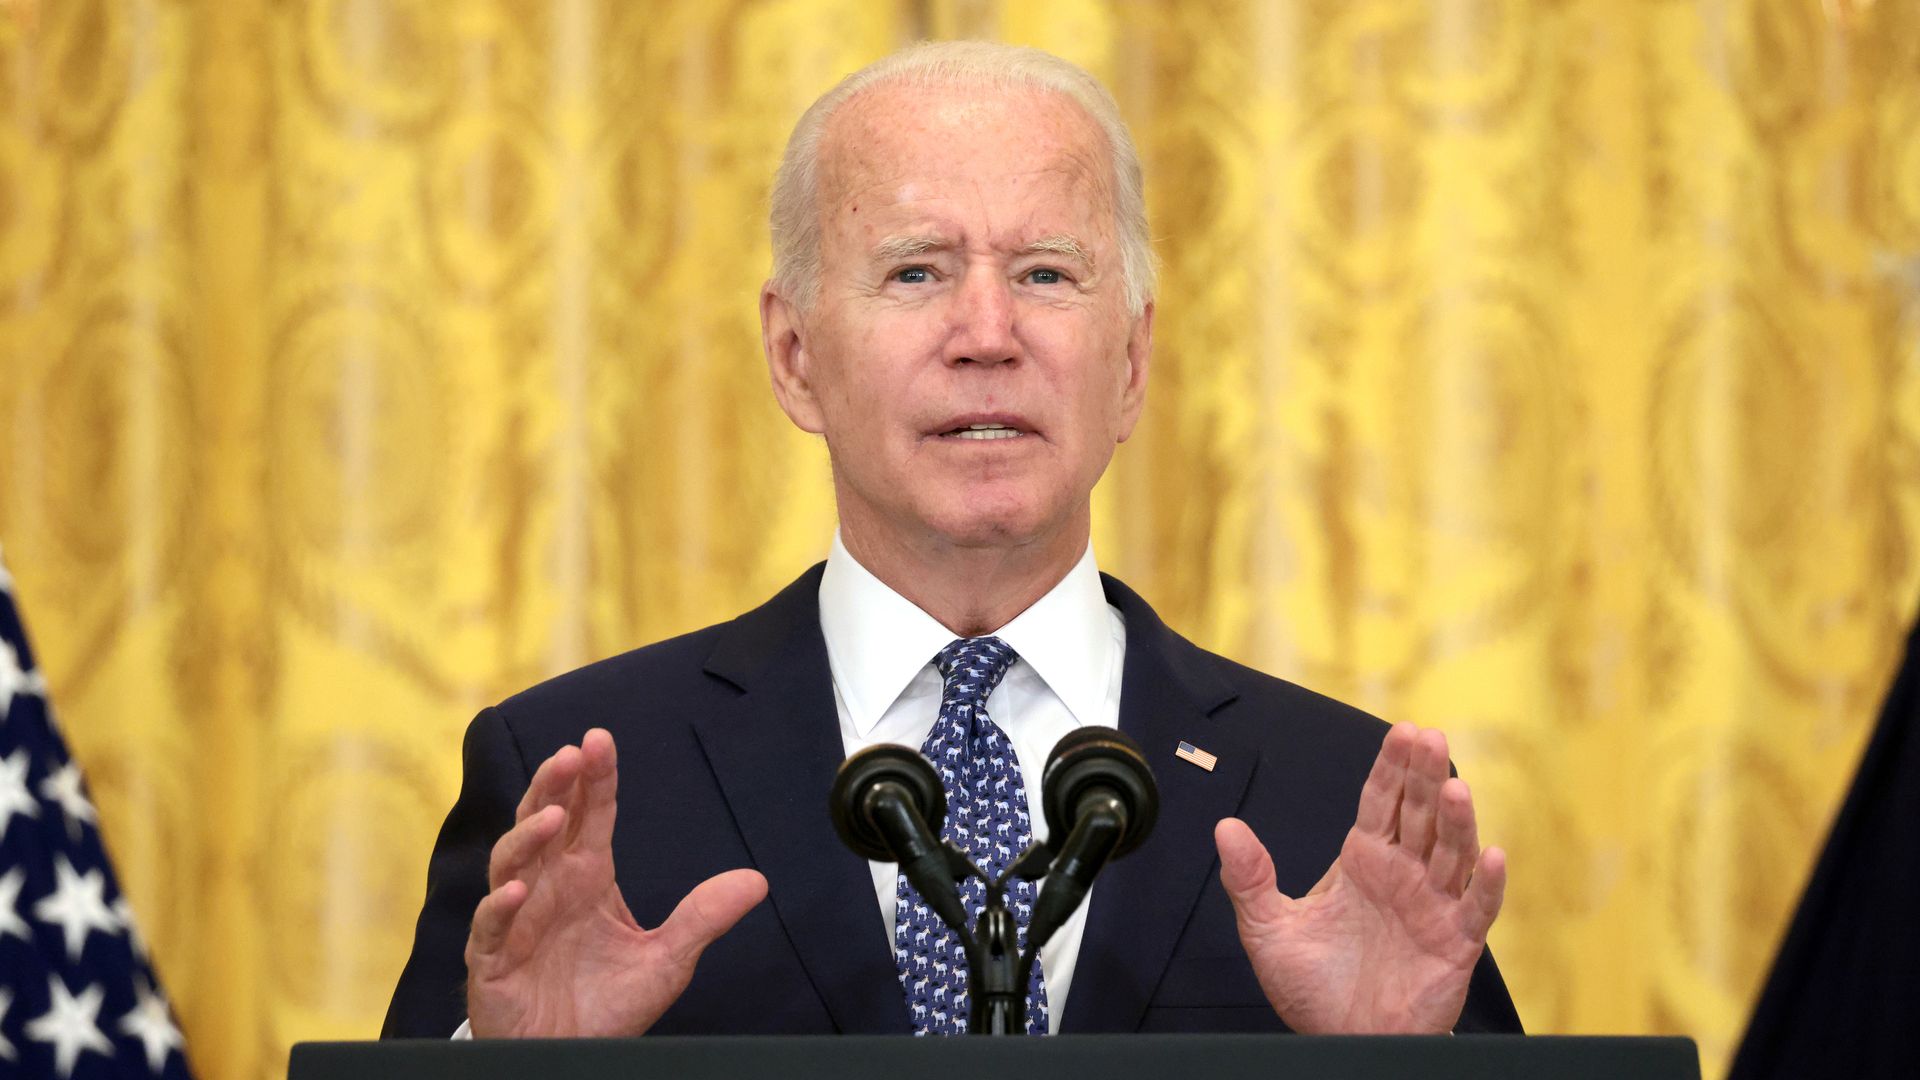 U.S. President Joe Biden speaks on workers rights and labor unions in the East Room at the White House on September 08, 2021